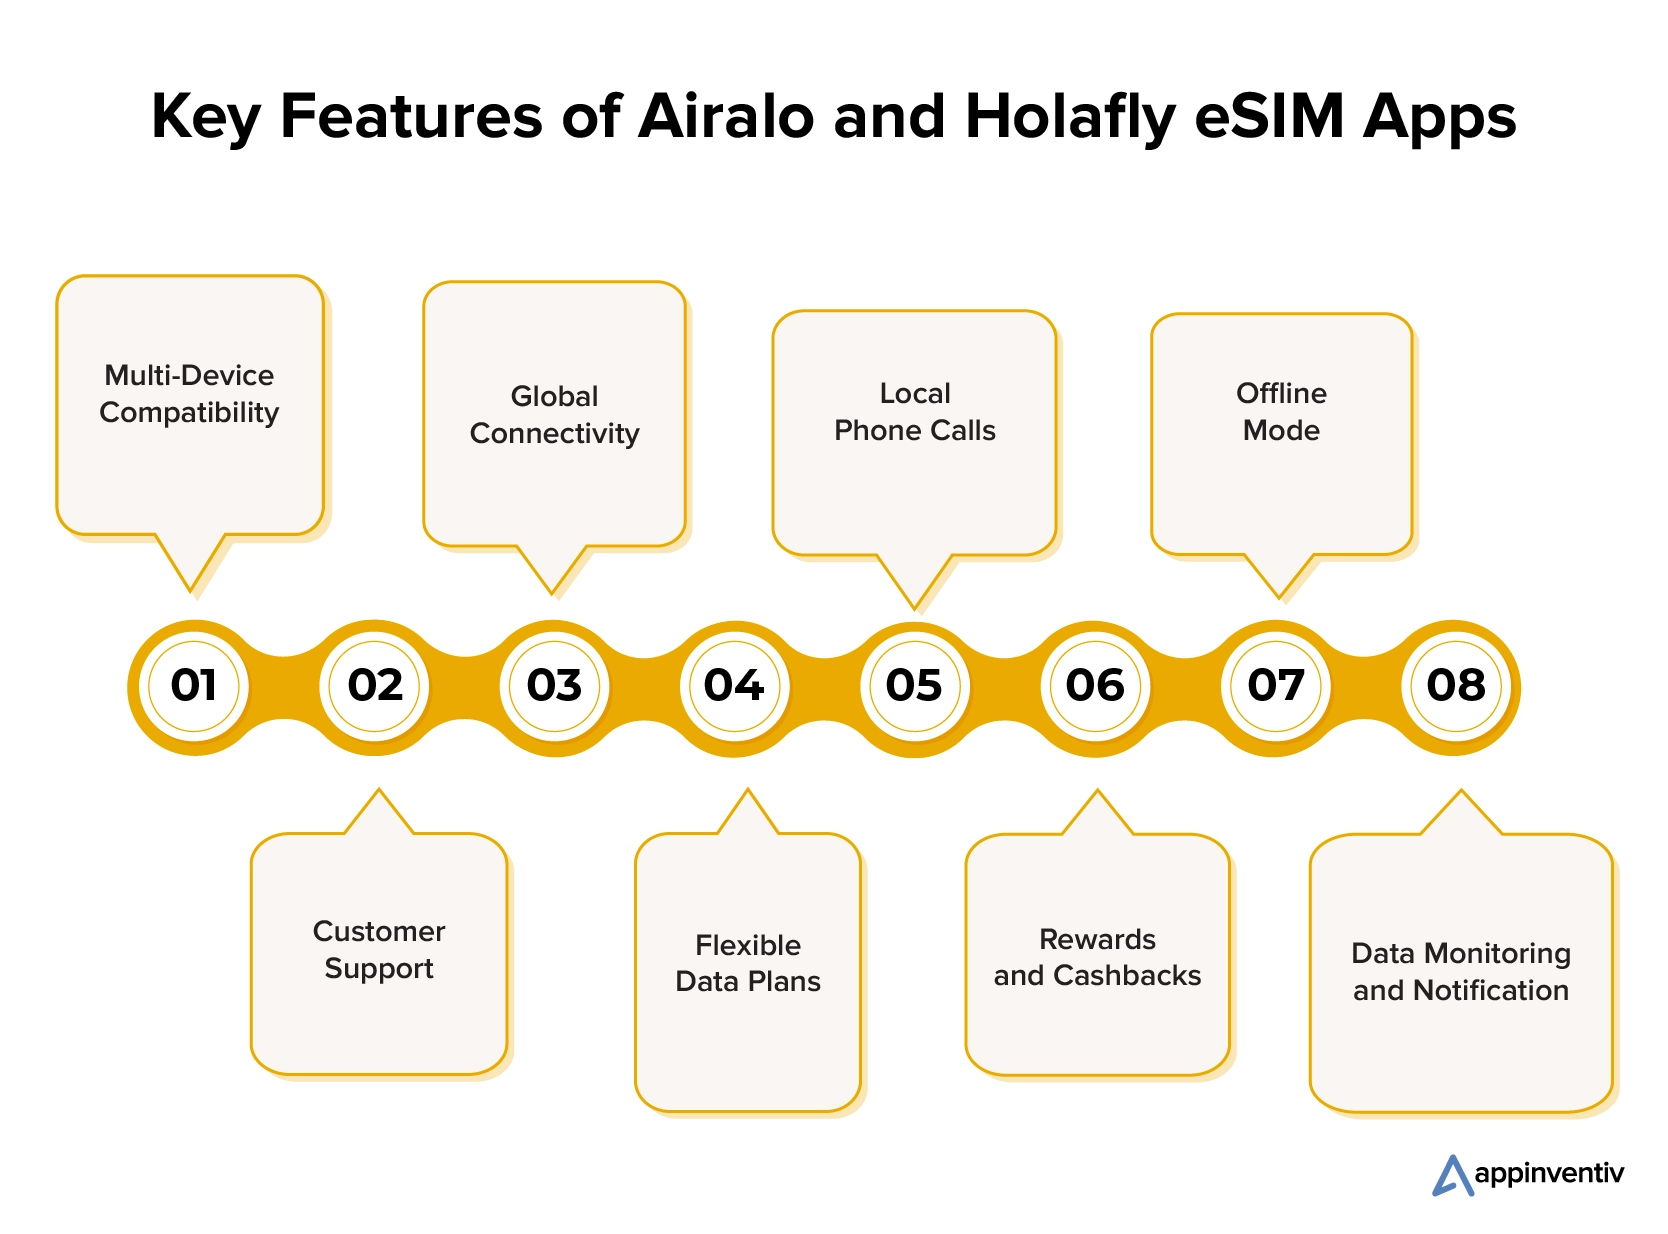 Key Features of Airalo and Holafly eSIM Apps